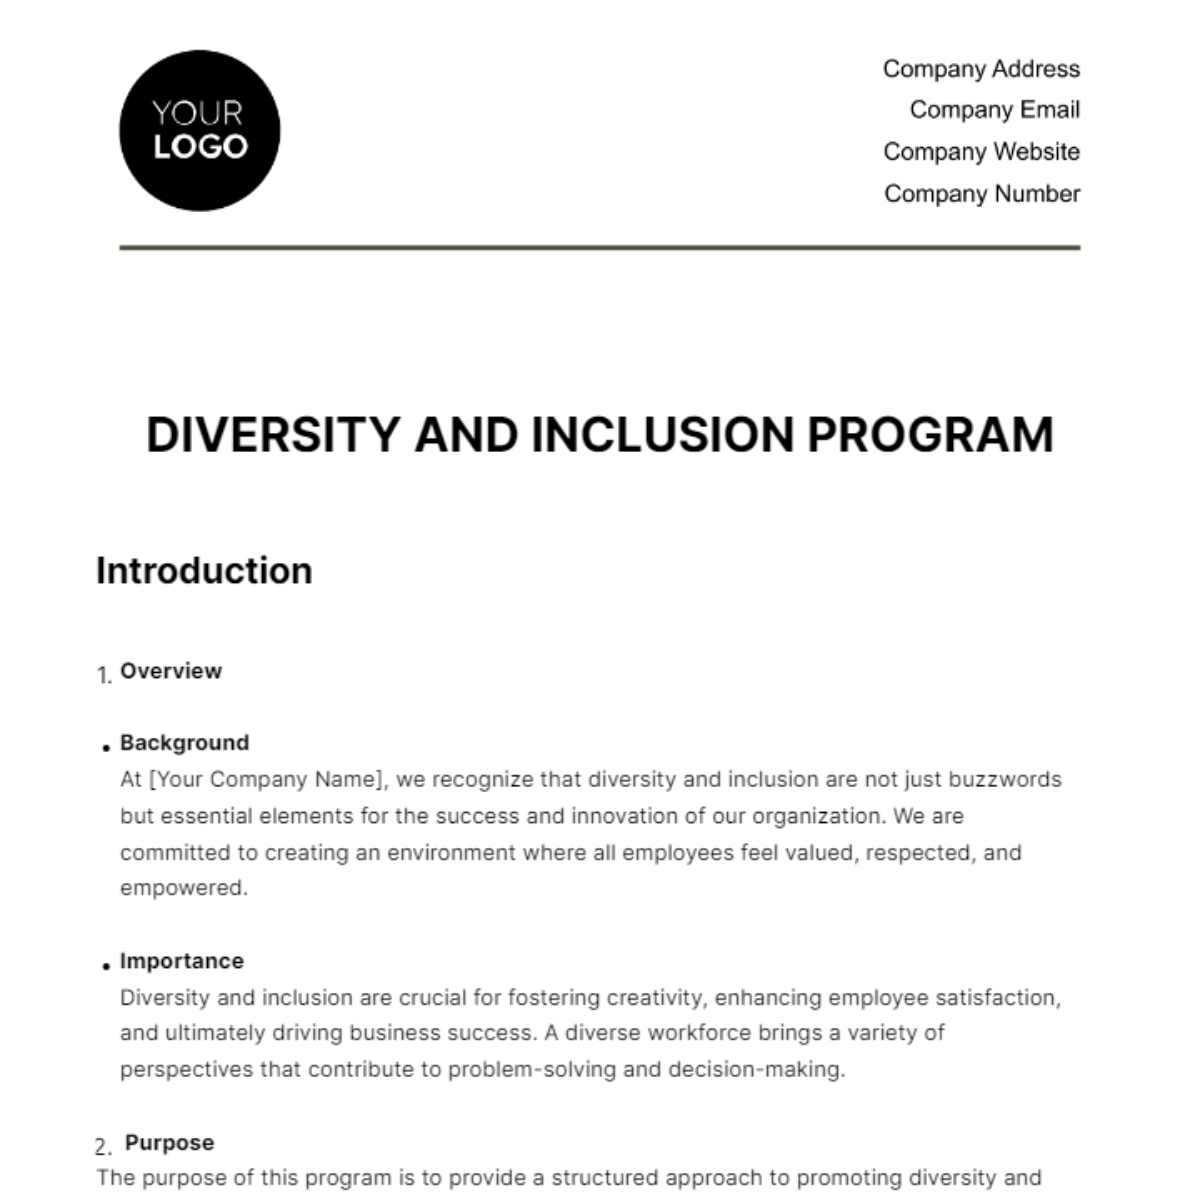 Diversity and Inclusion Program HR Template